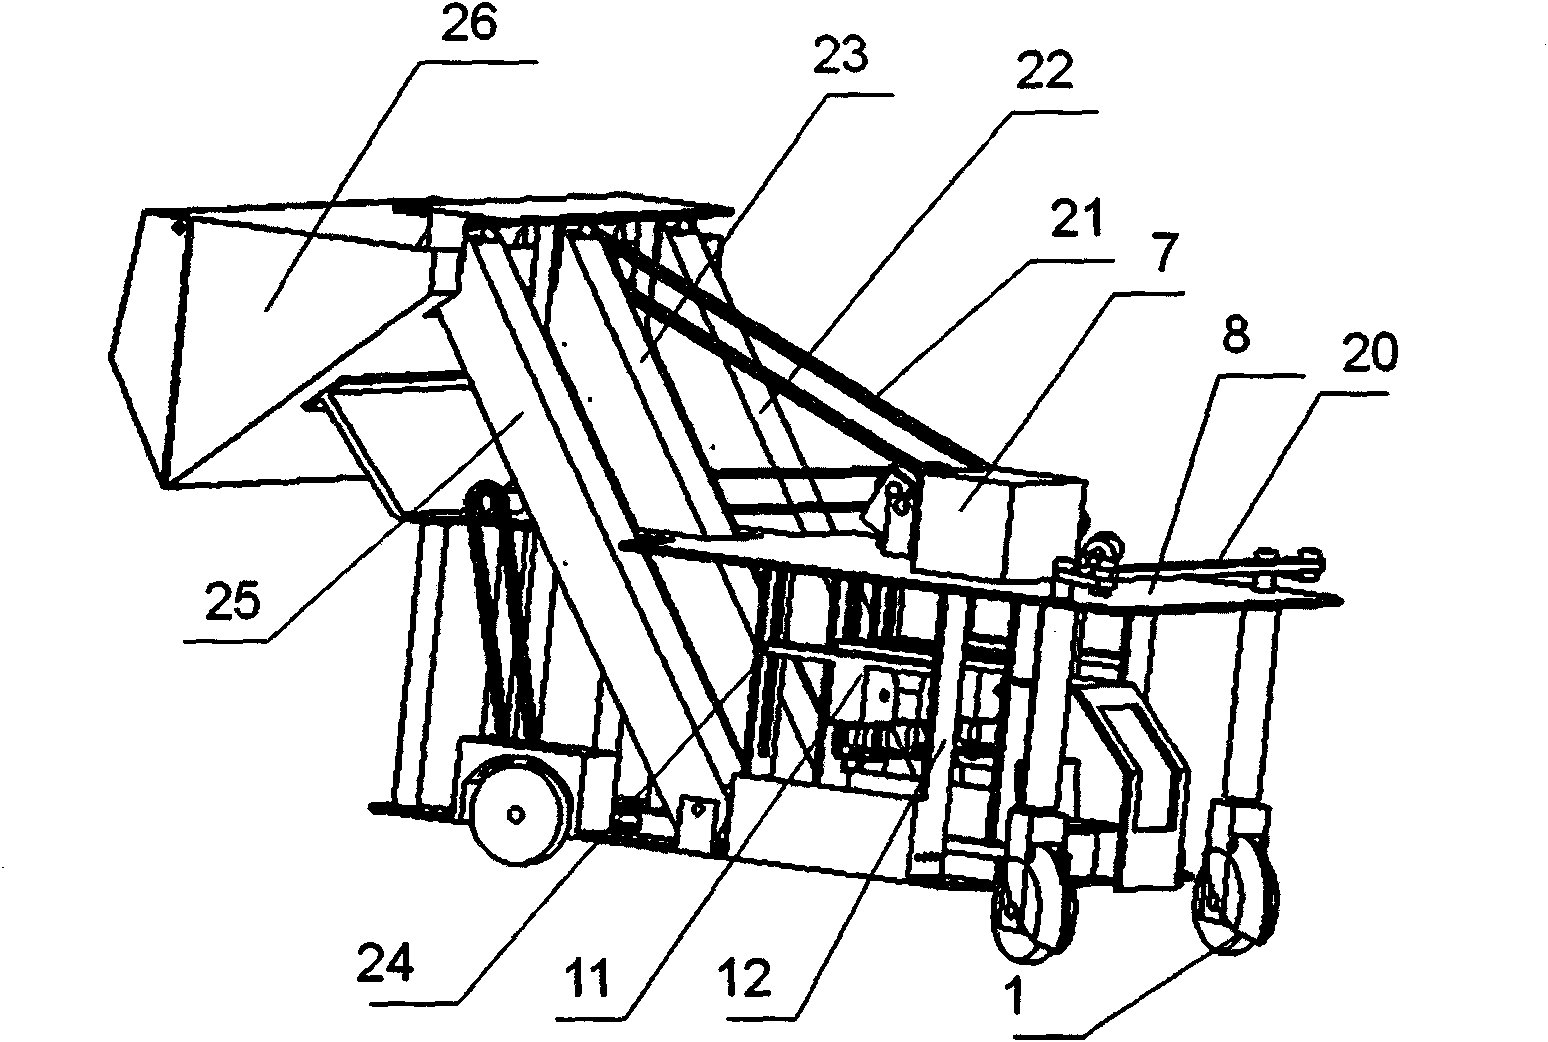 Tobacco harvesting machine with roller cutter head